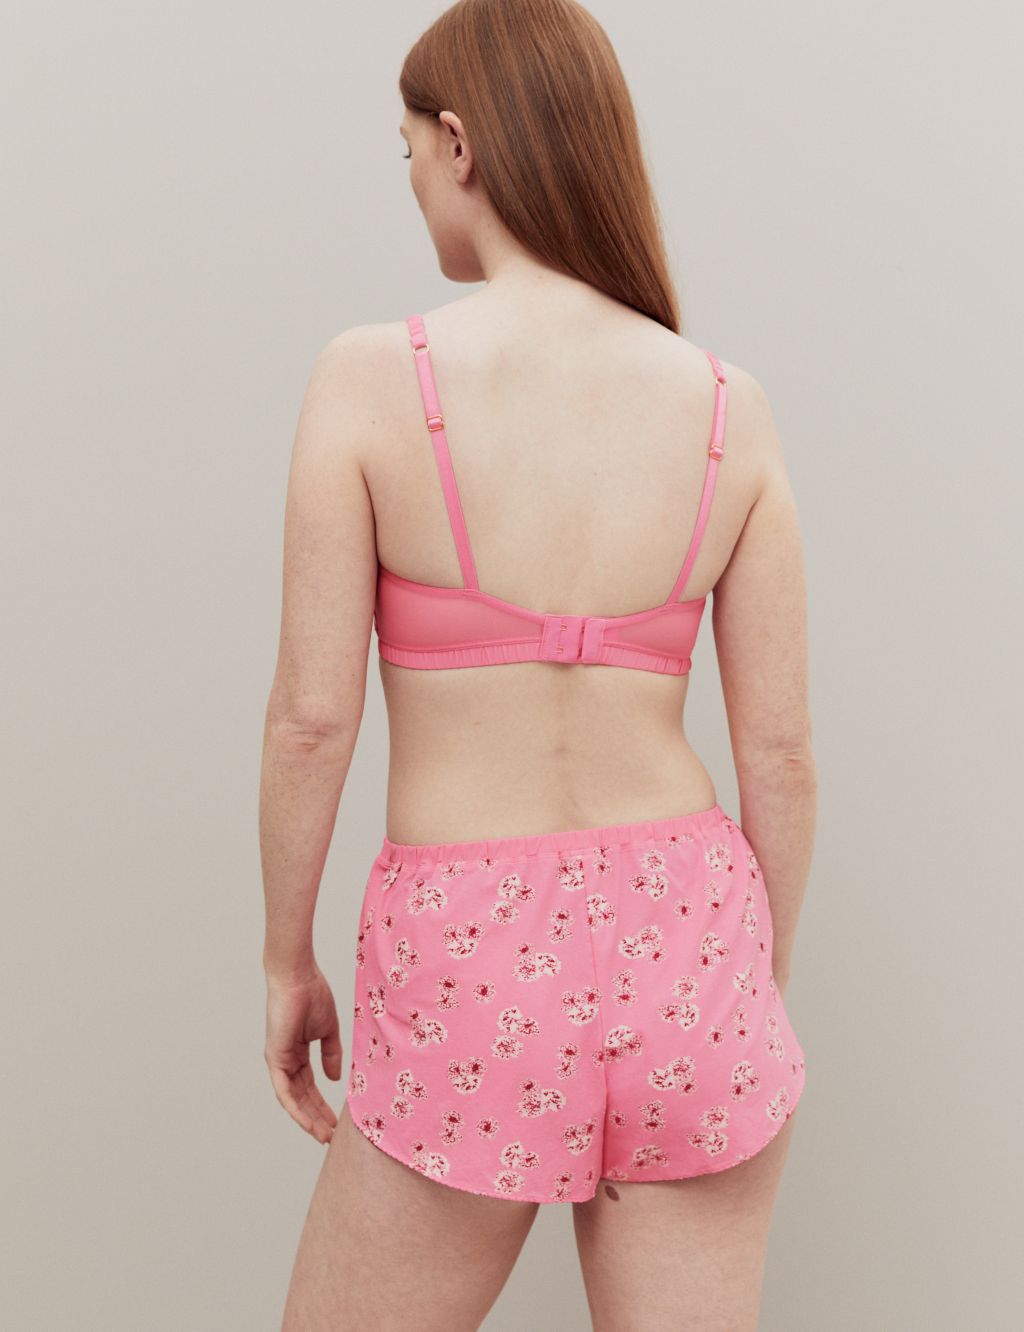 Floral Print High Waisted French Knickers image 3